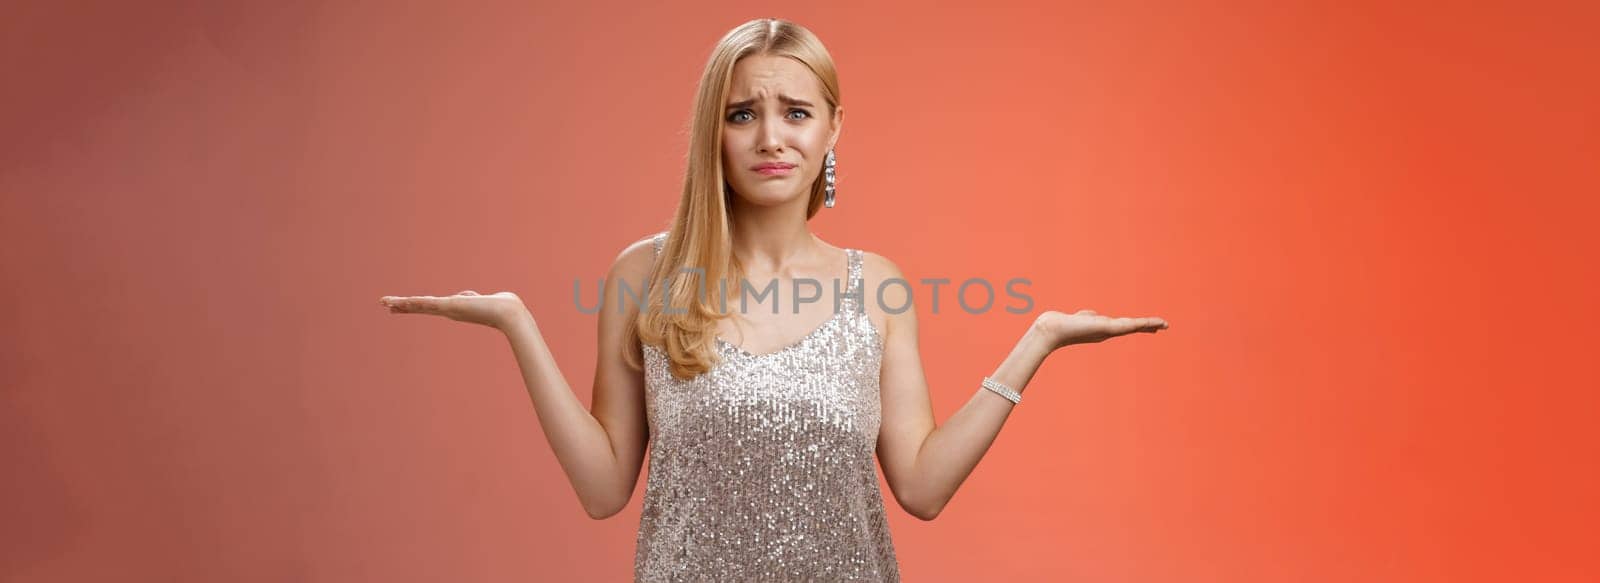 Nervous unsure doubtful cute blond woman struggle make decision shrugging pointing sideways frowning upset standing insecure feel pressure cannot decide choice make, frustrated red background.